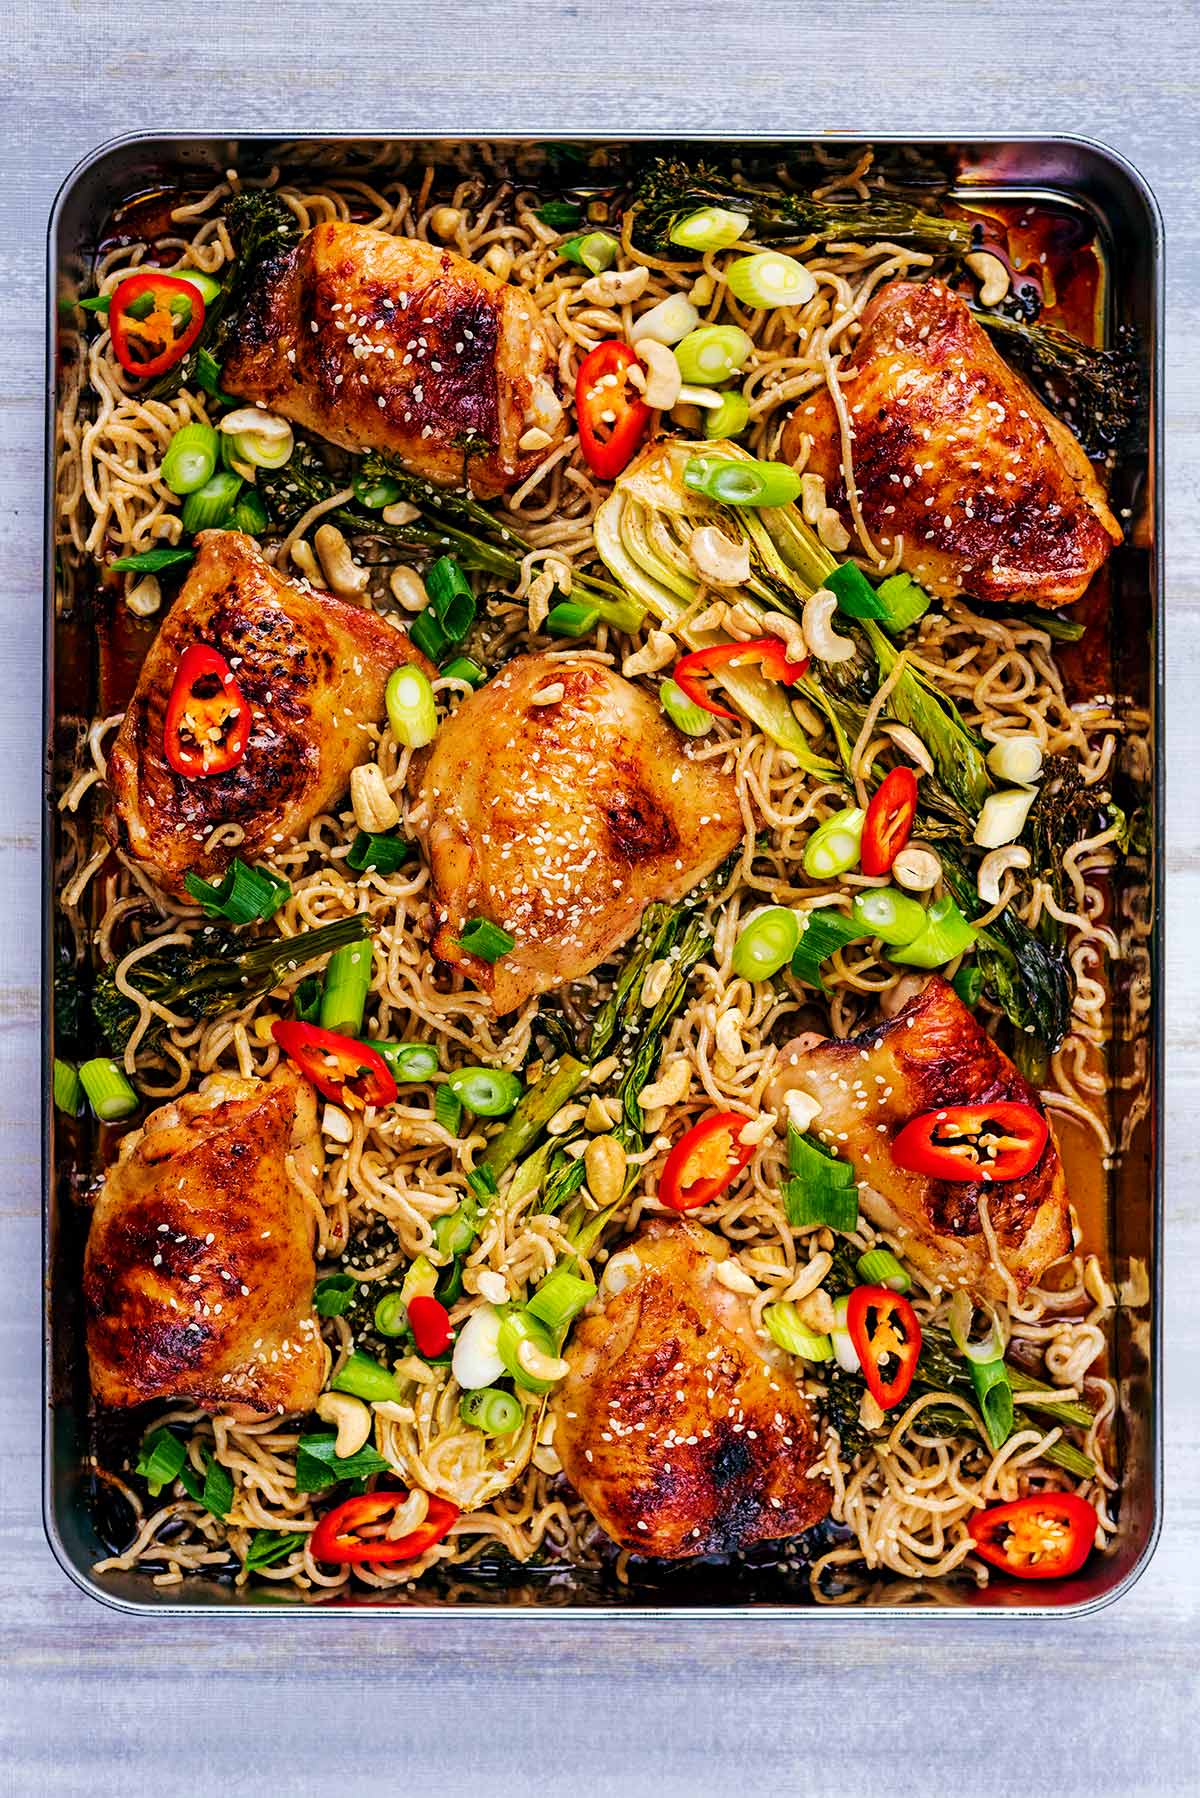 cooked chicken thighs and bok choy on a large baking tray with scallions, sliced red chillies and sesame seeds.